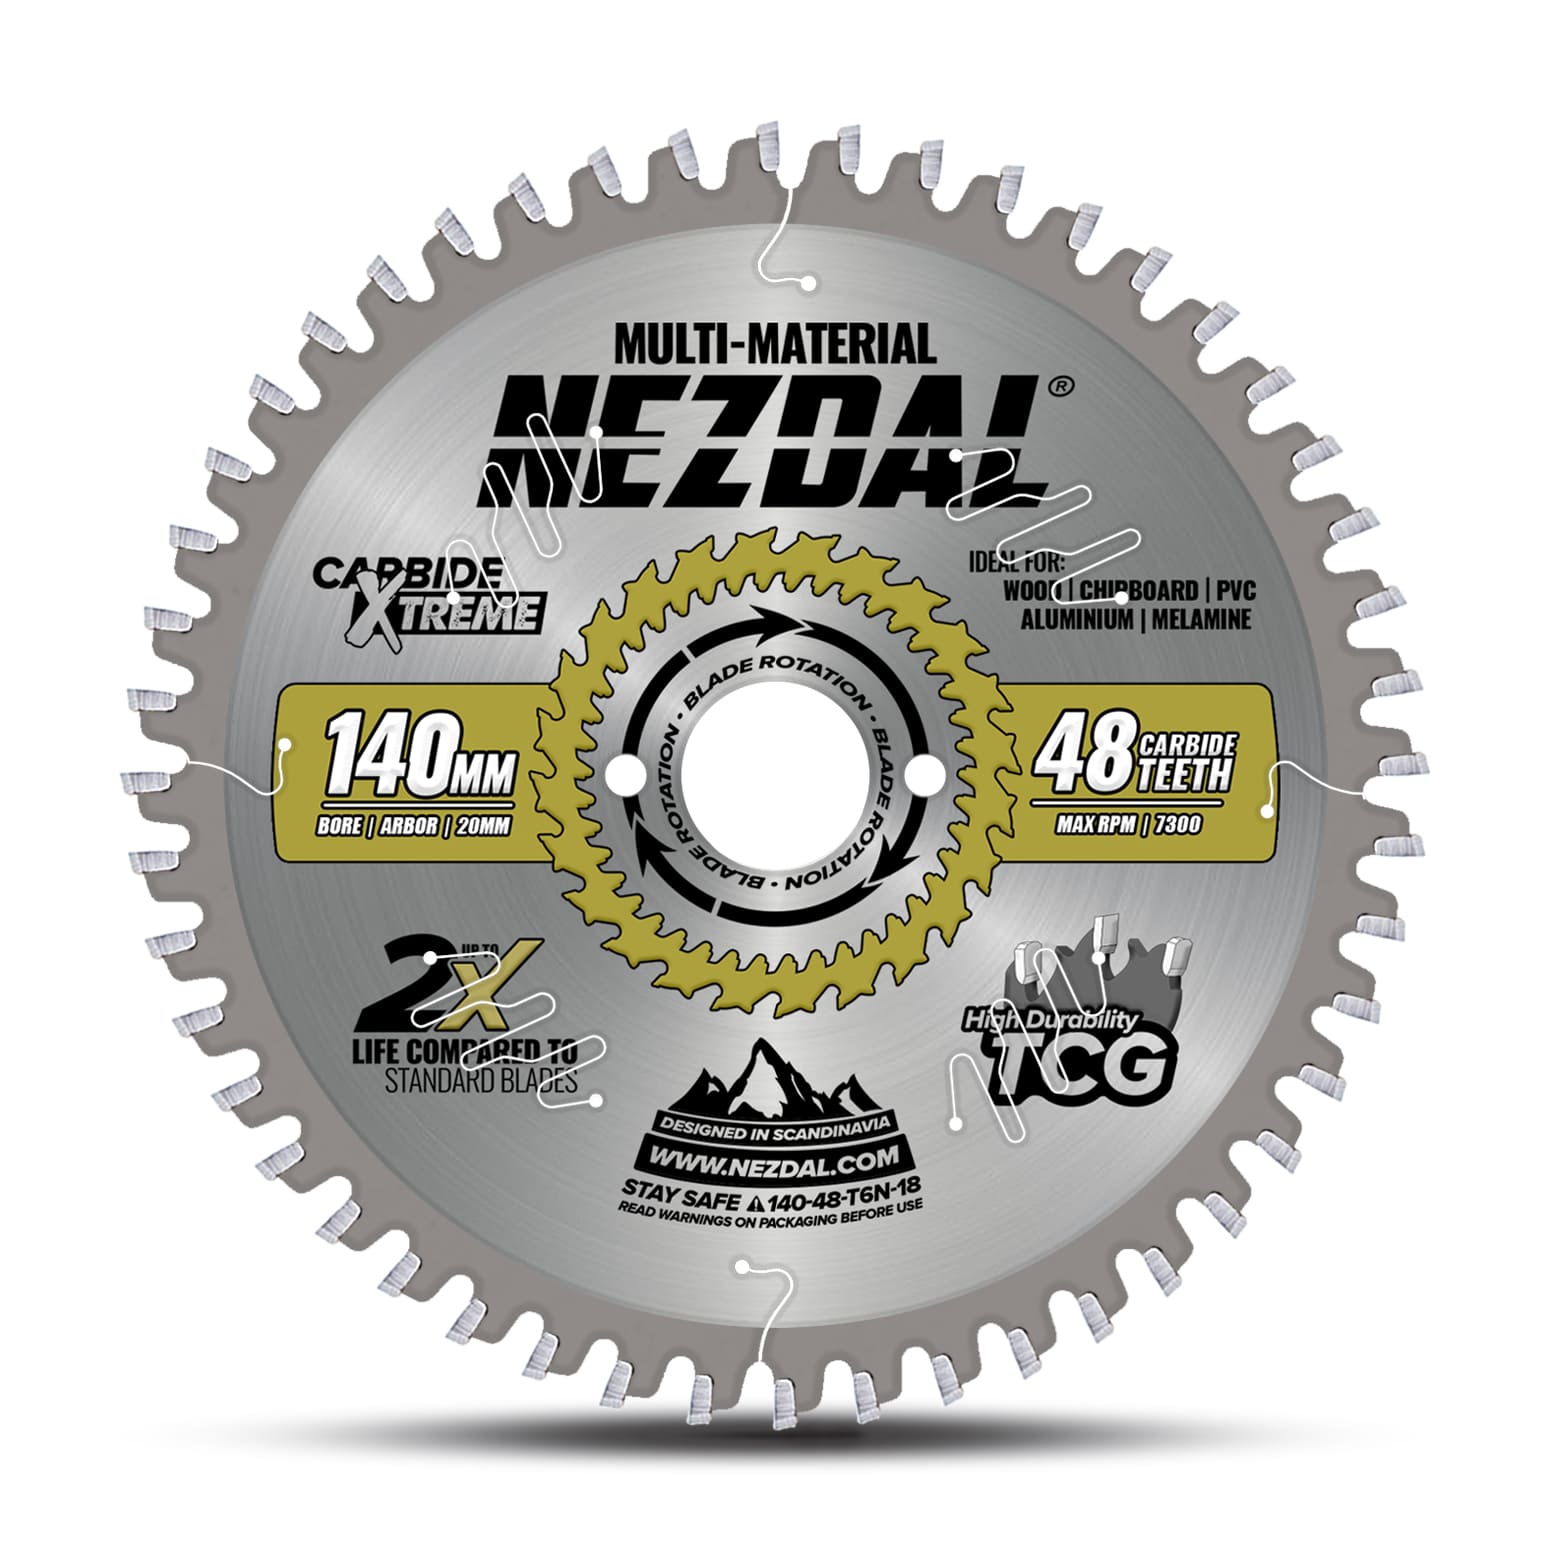 140mm saw blade with 48 teeth for multi-material